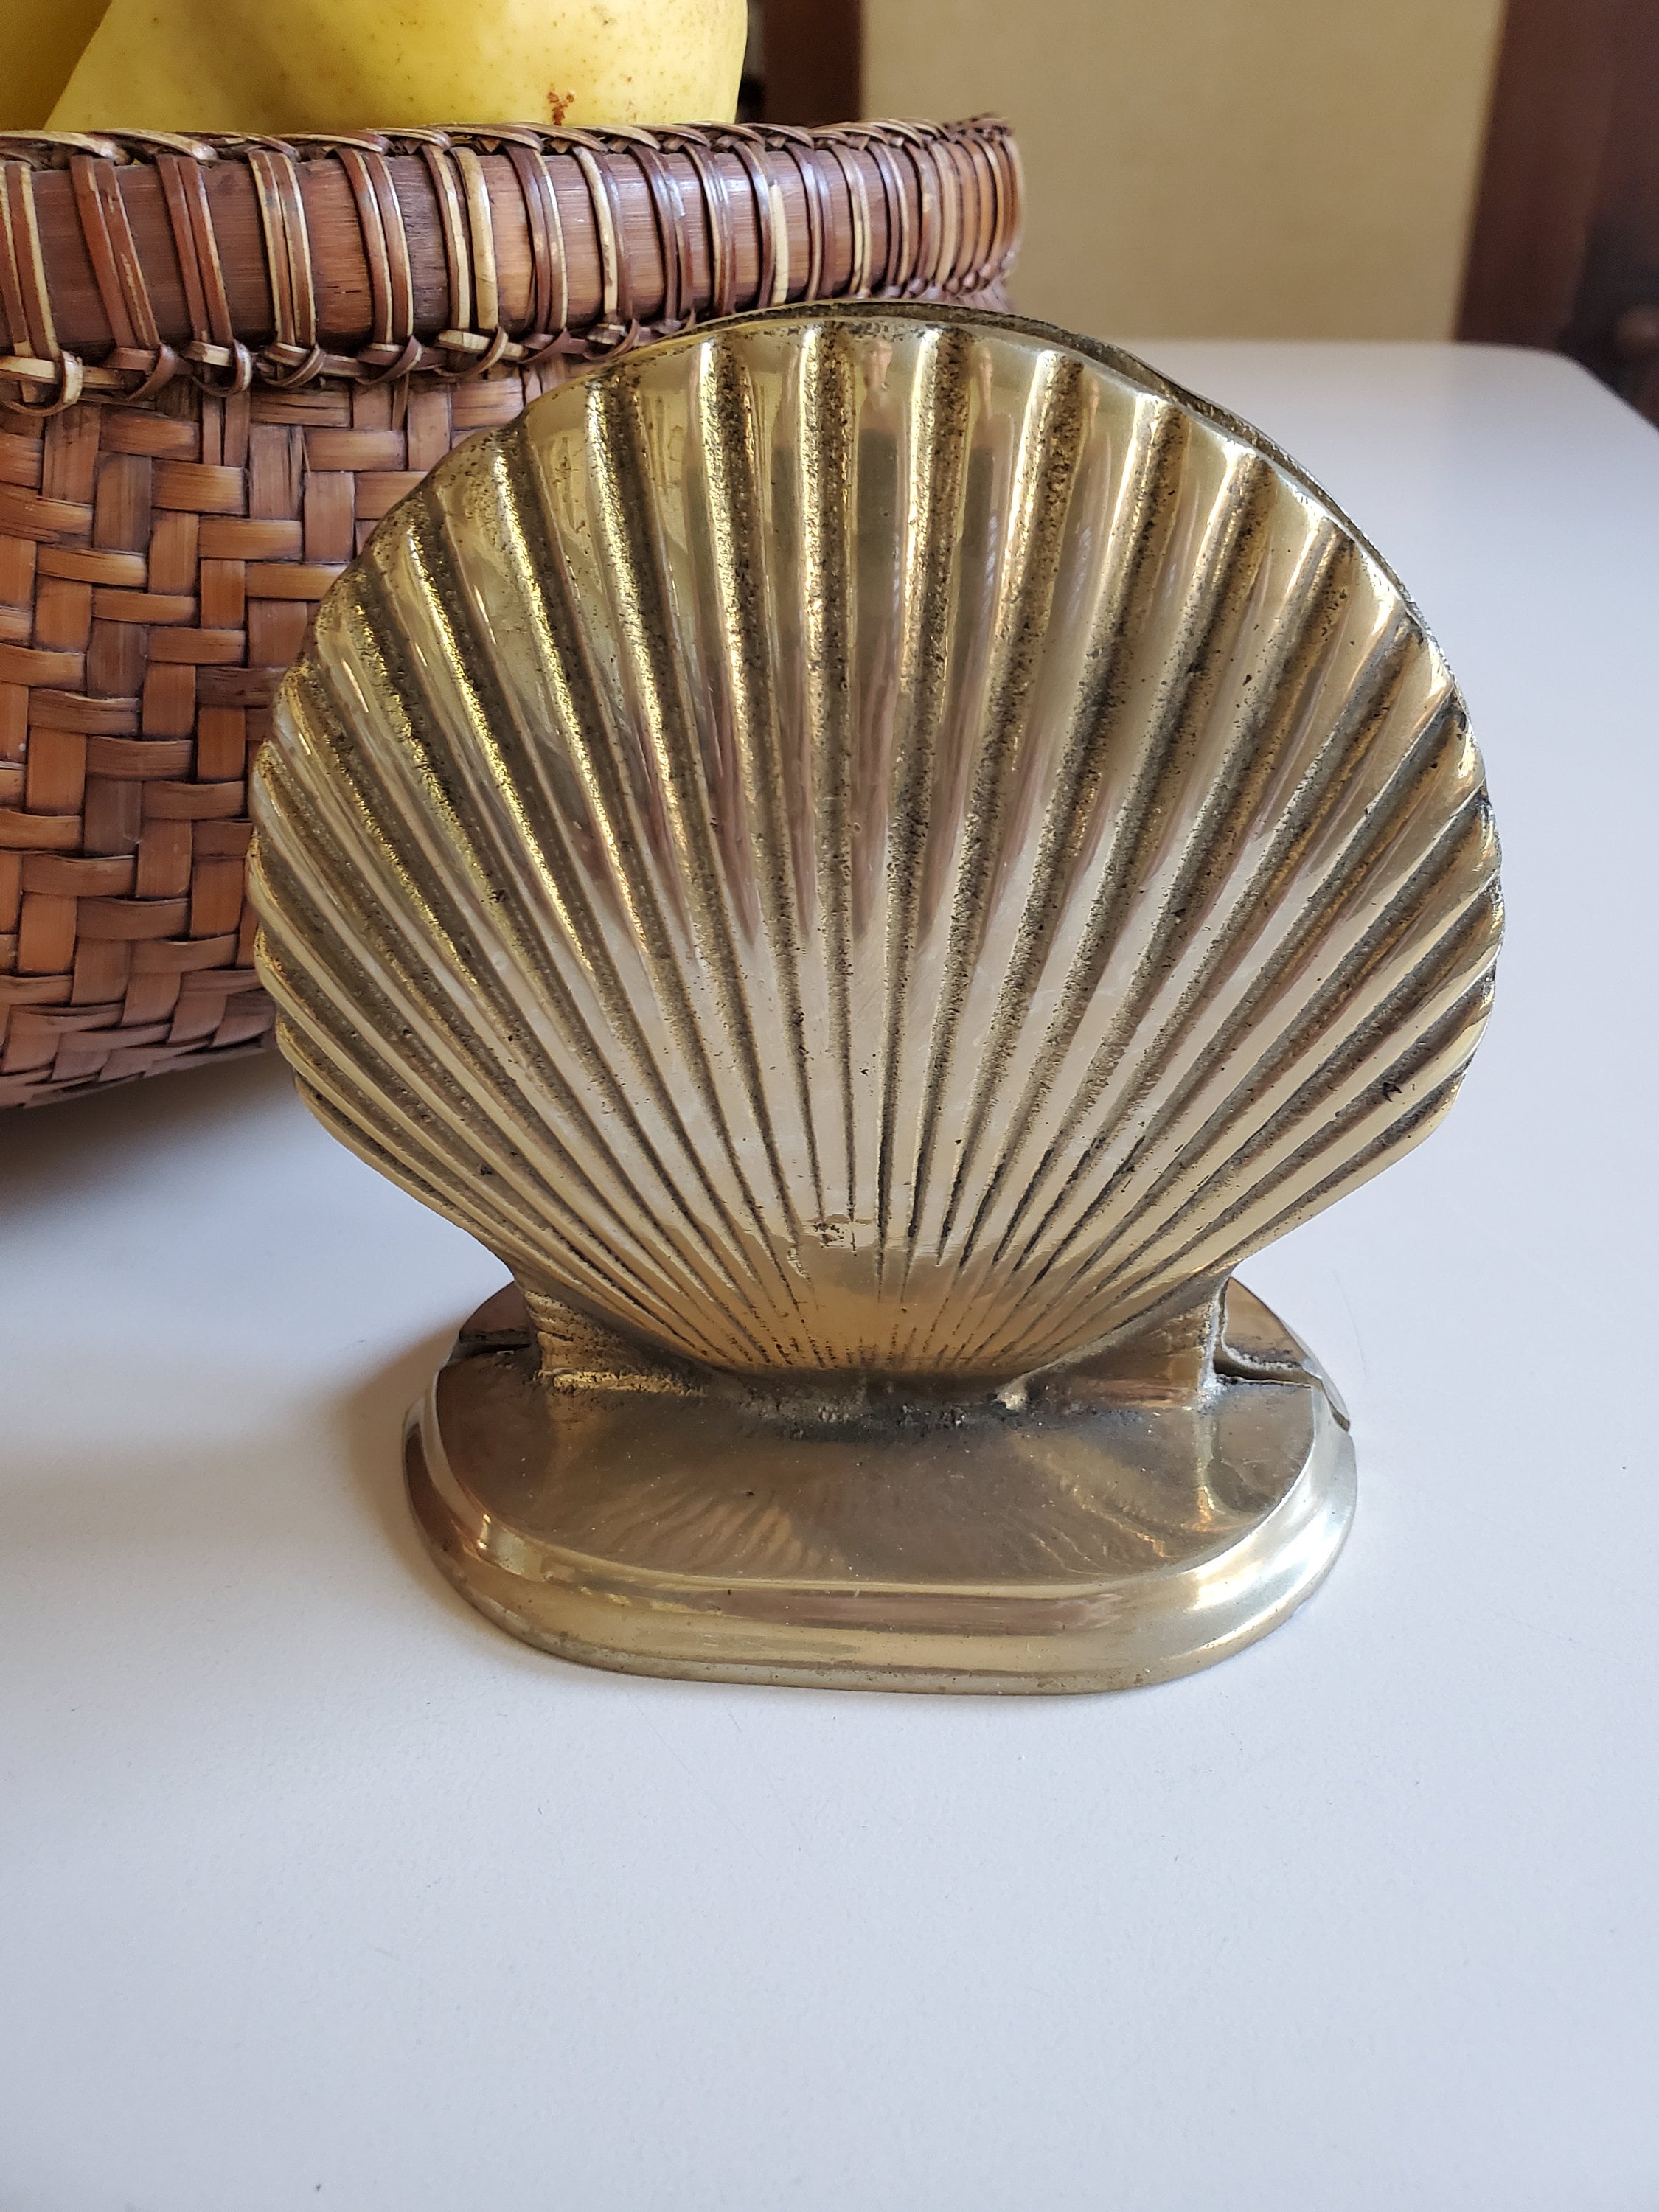 Pair of Vintage Brass Clam Shell Bookends at 1stDibs  brass shell bookends,  shell book ends, vintage brass shell bookends